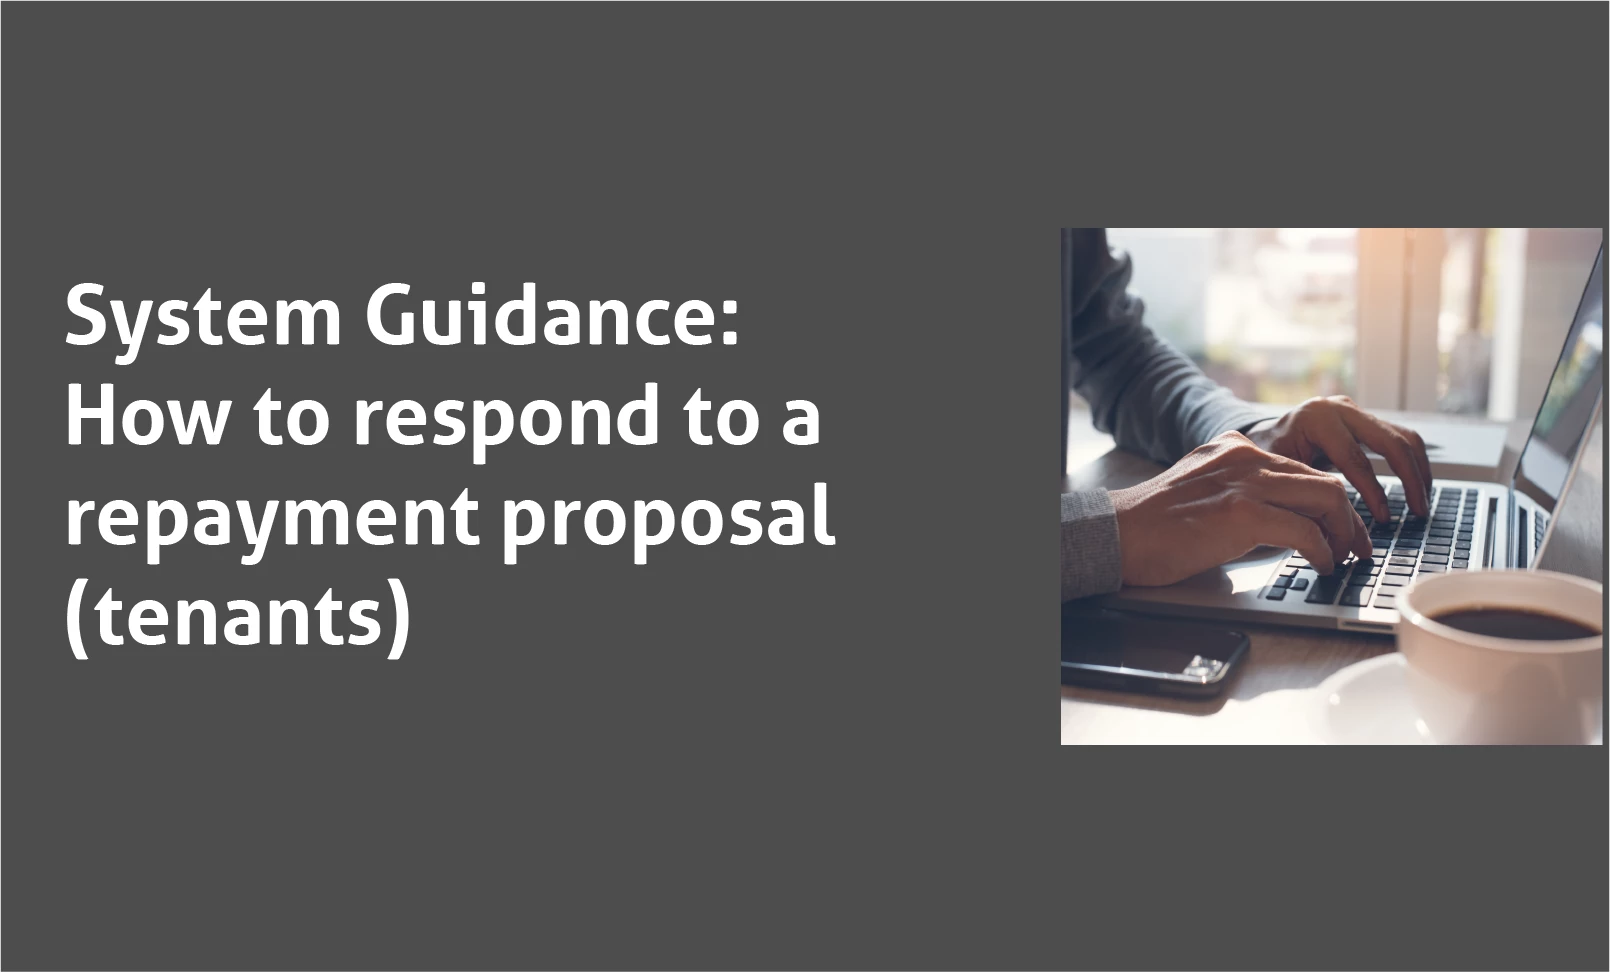 How to respond to a repayment proposal - SafeDeposits Scotland